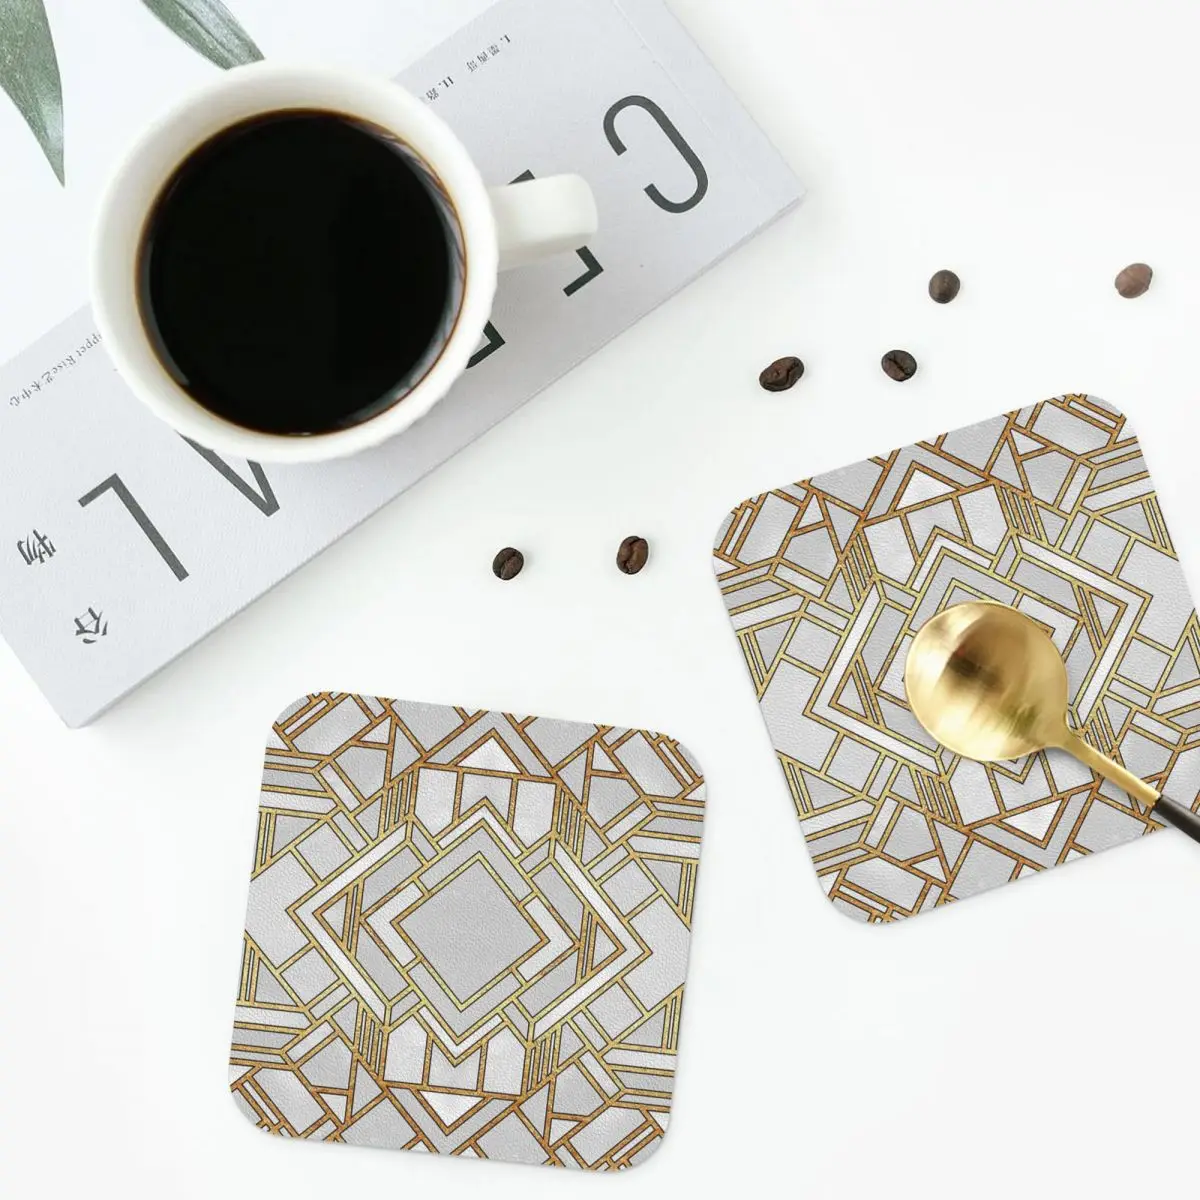 

Art Deco 1 Coasters PVC Leather Placemats Waterproof Insulation Coffee Mats for Decor Home Kitchen Dining Pads Set of 4